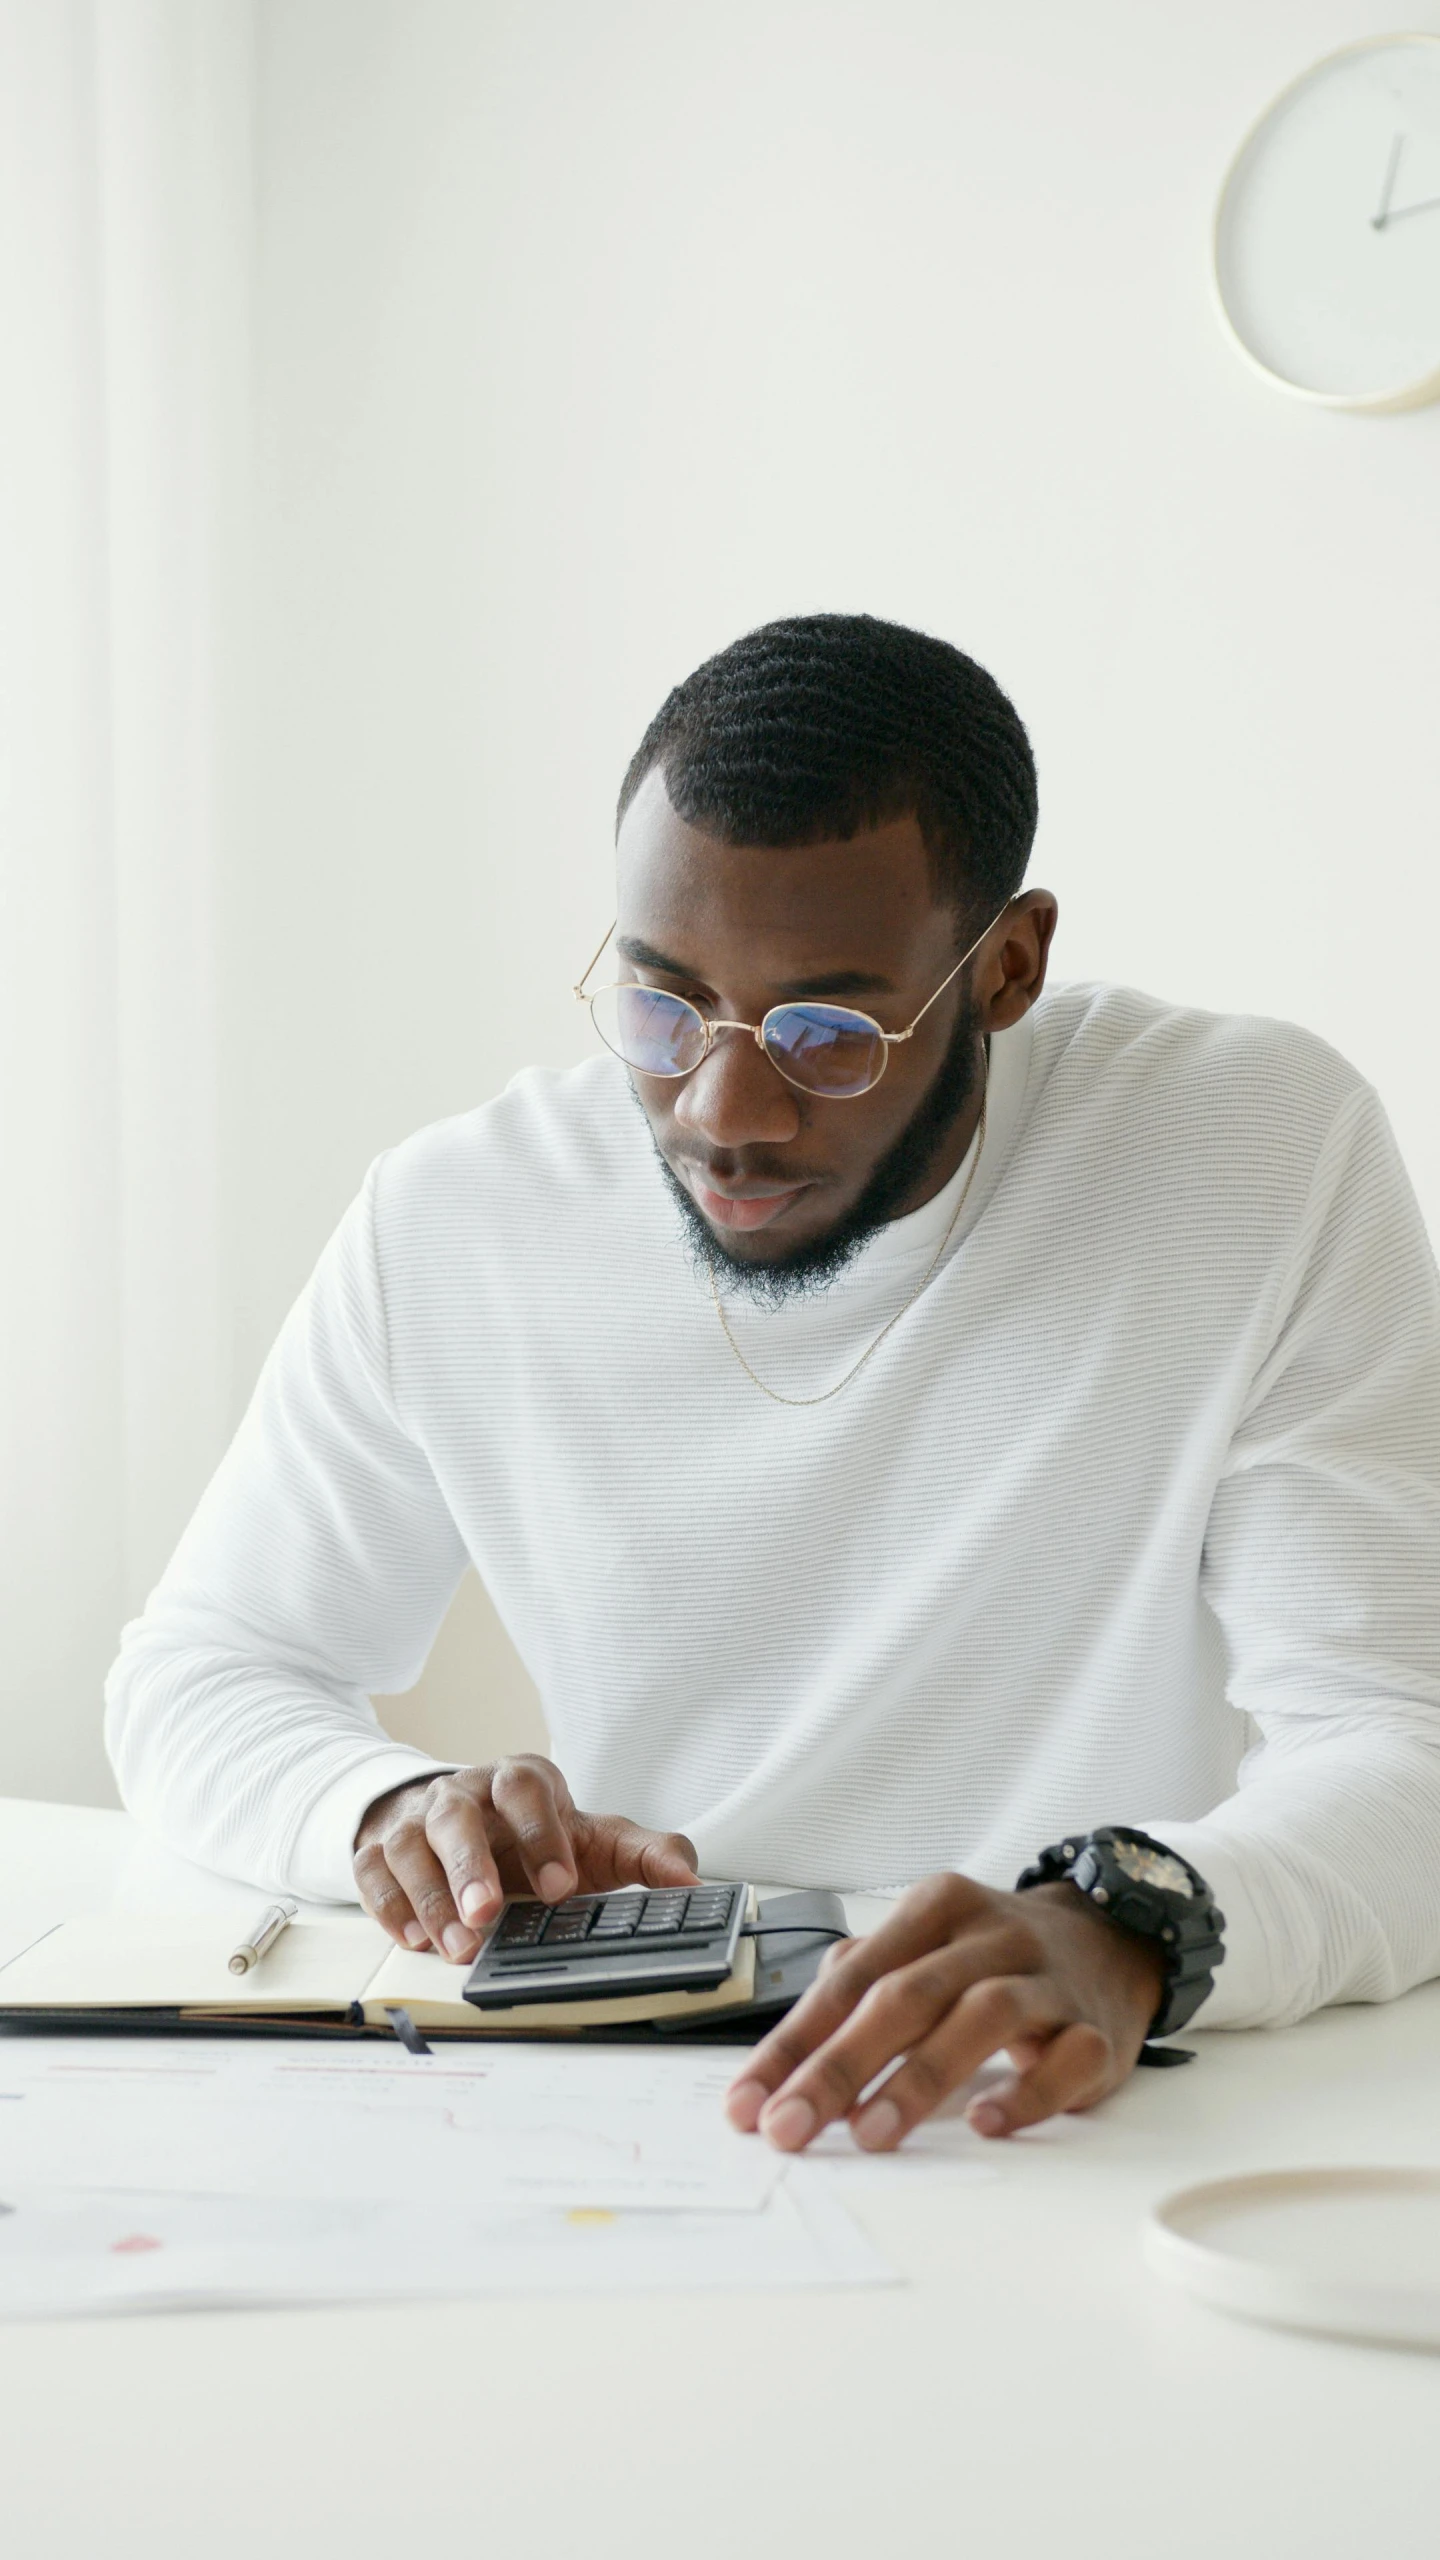 a man sitting at a table using a calculator, mkbhd, wearing round glasses, thumbnail, multiple stories